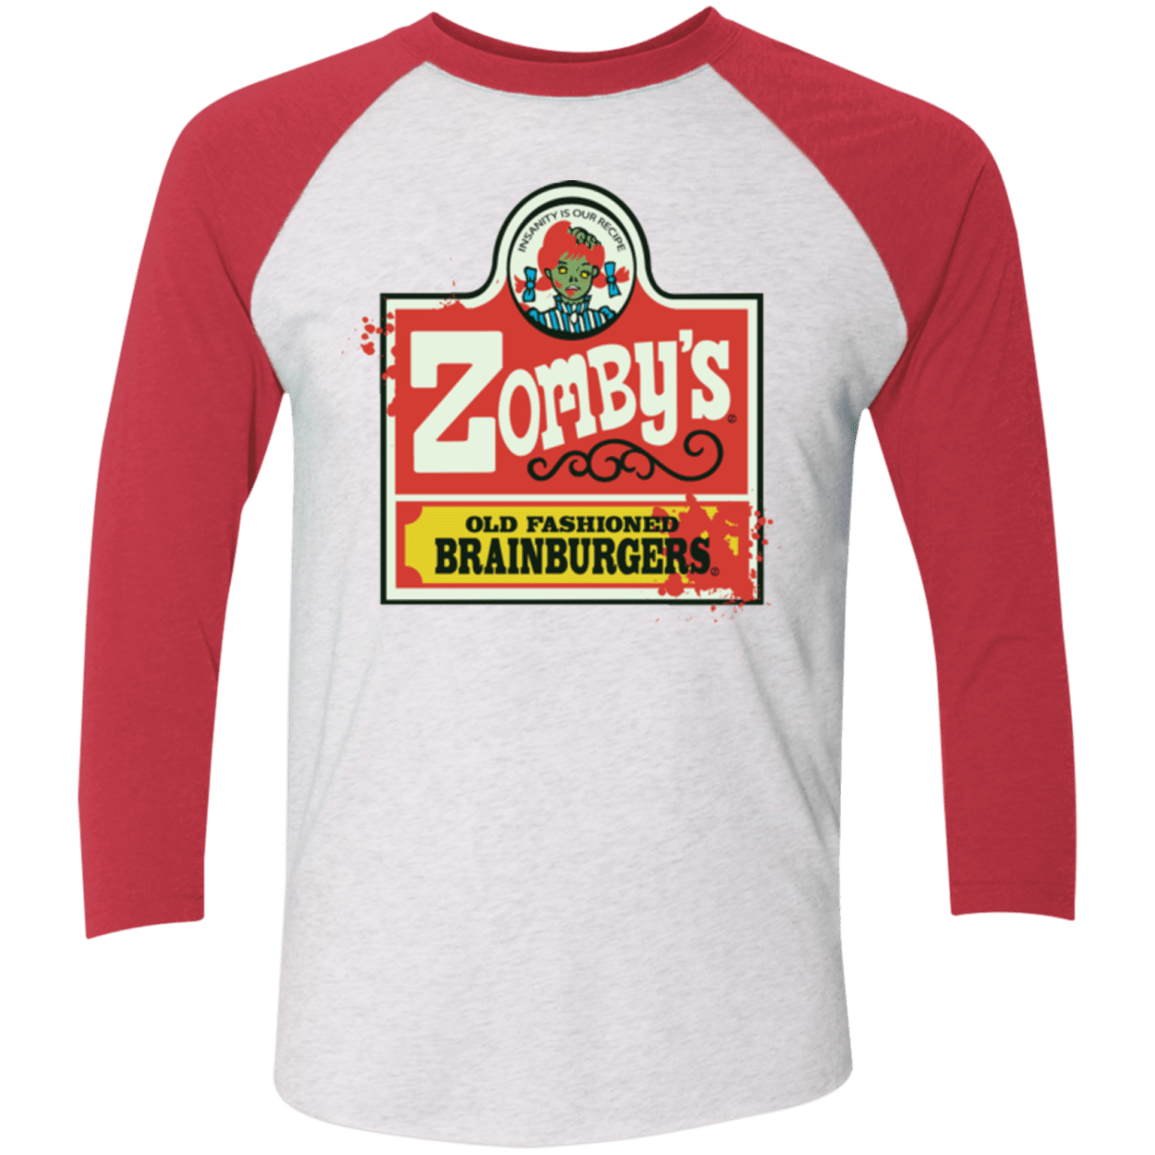 T-Shirts Heather White/Vintage Red / X-Small zombys Men's Triblend 3/4 Sleeve